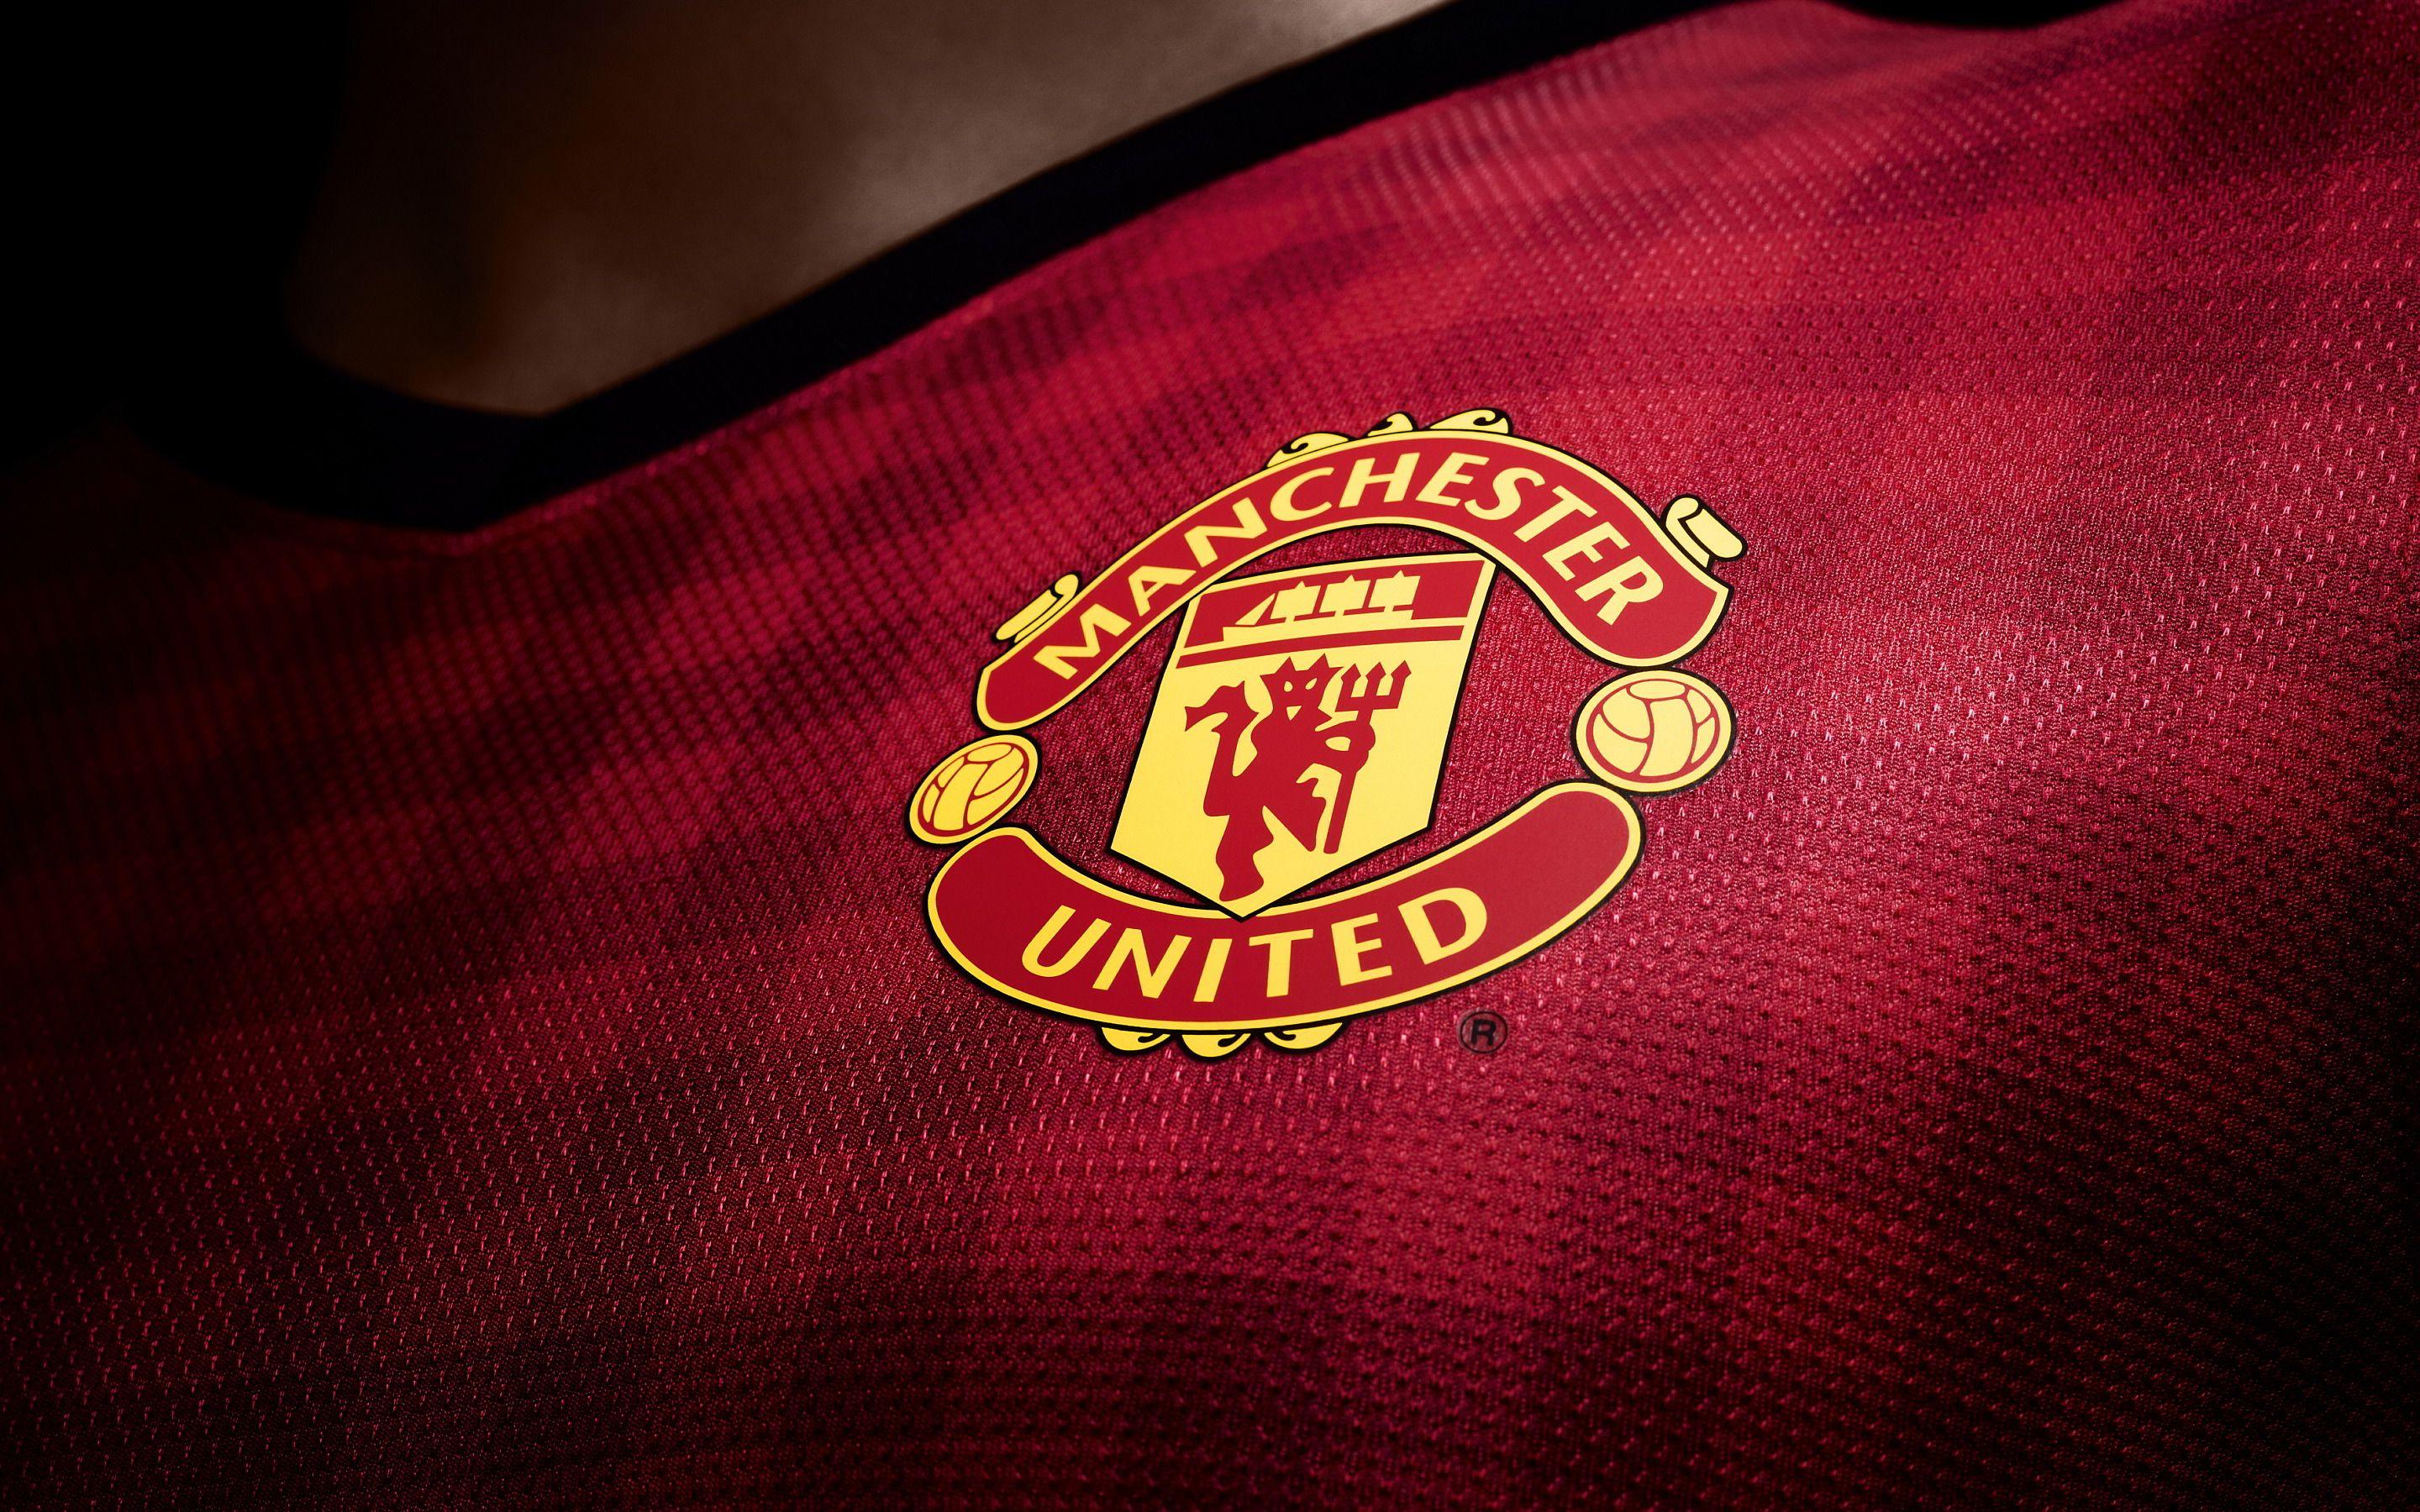 Here some logo's and teamphotos of Manchester United F.C